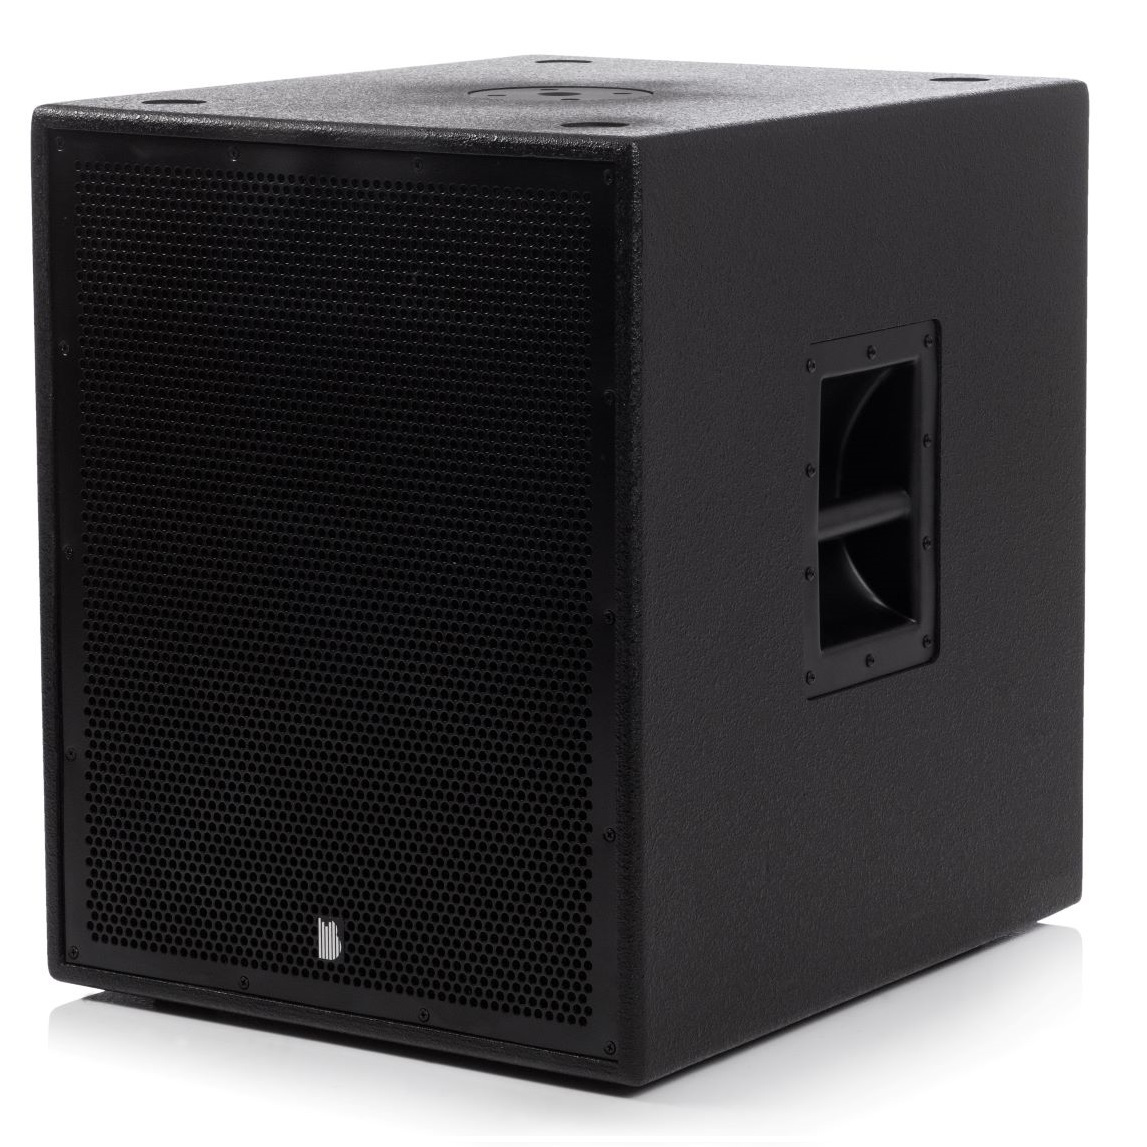 Delta 15" Birch Plywood Passive Subwoofer 3000w 8 ohm Compact Subwoofer